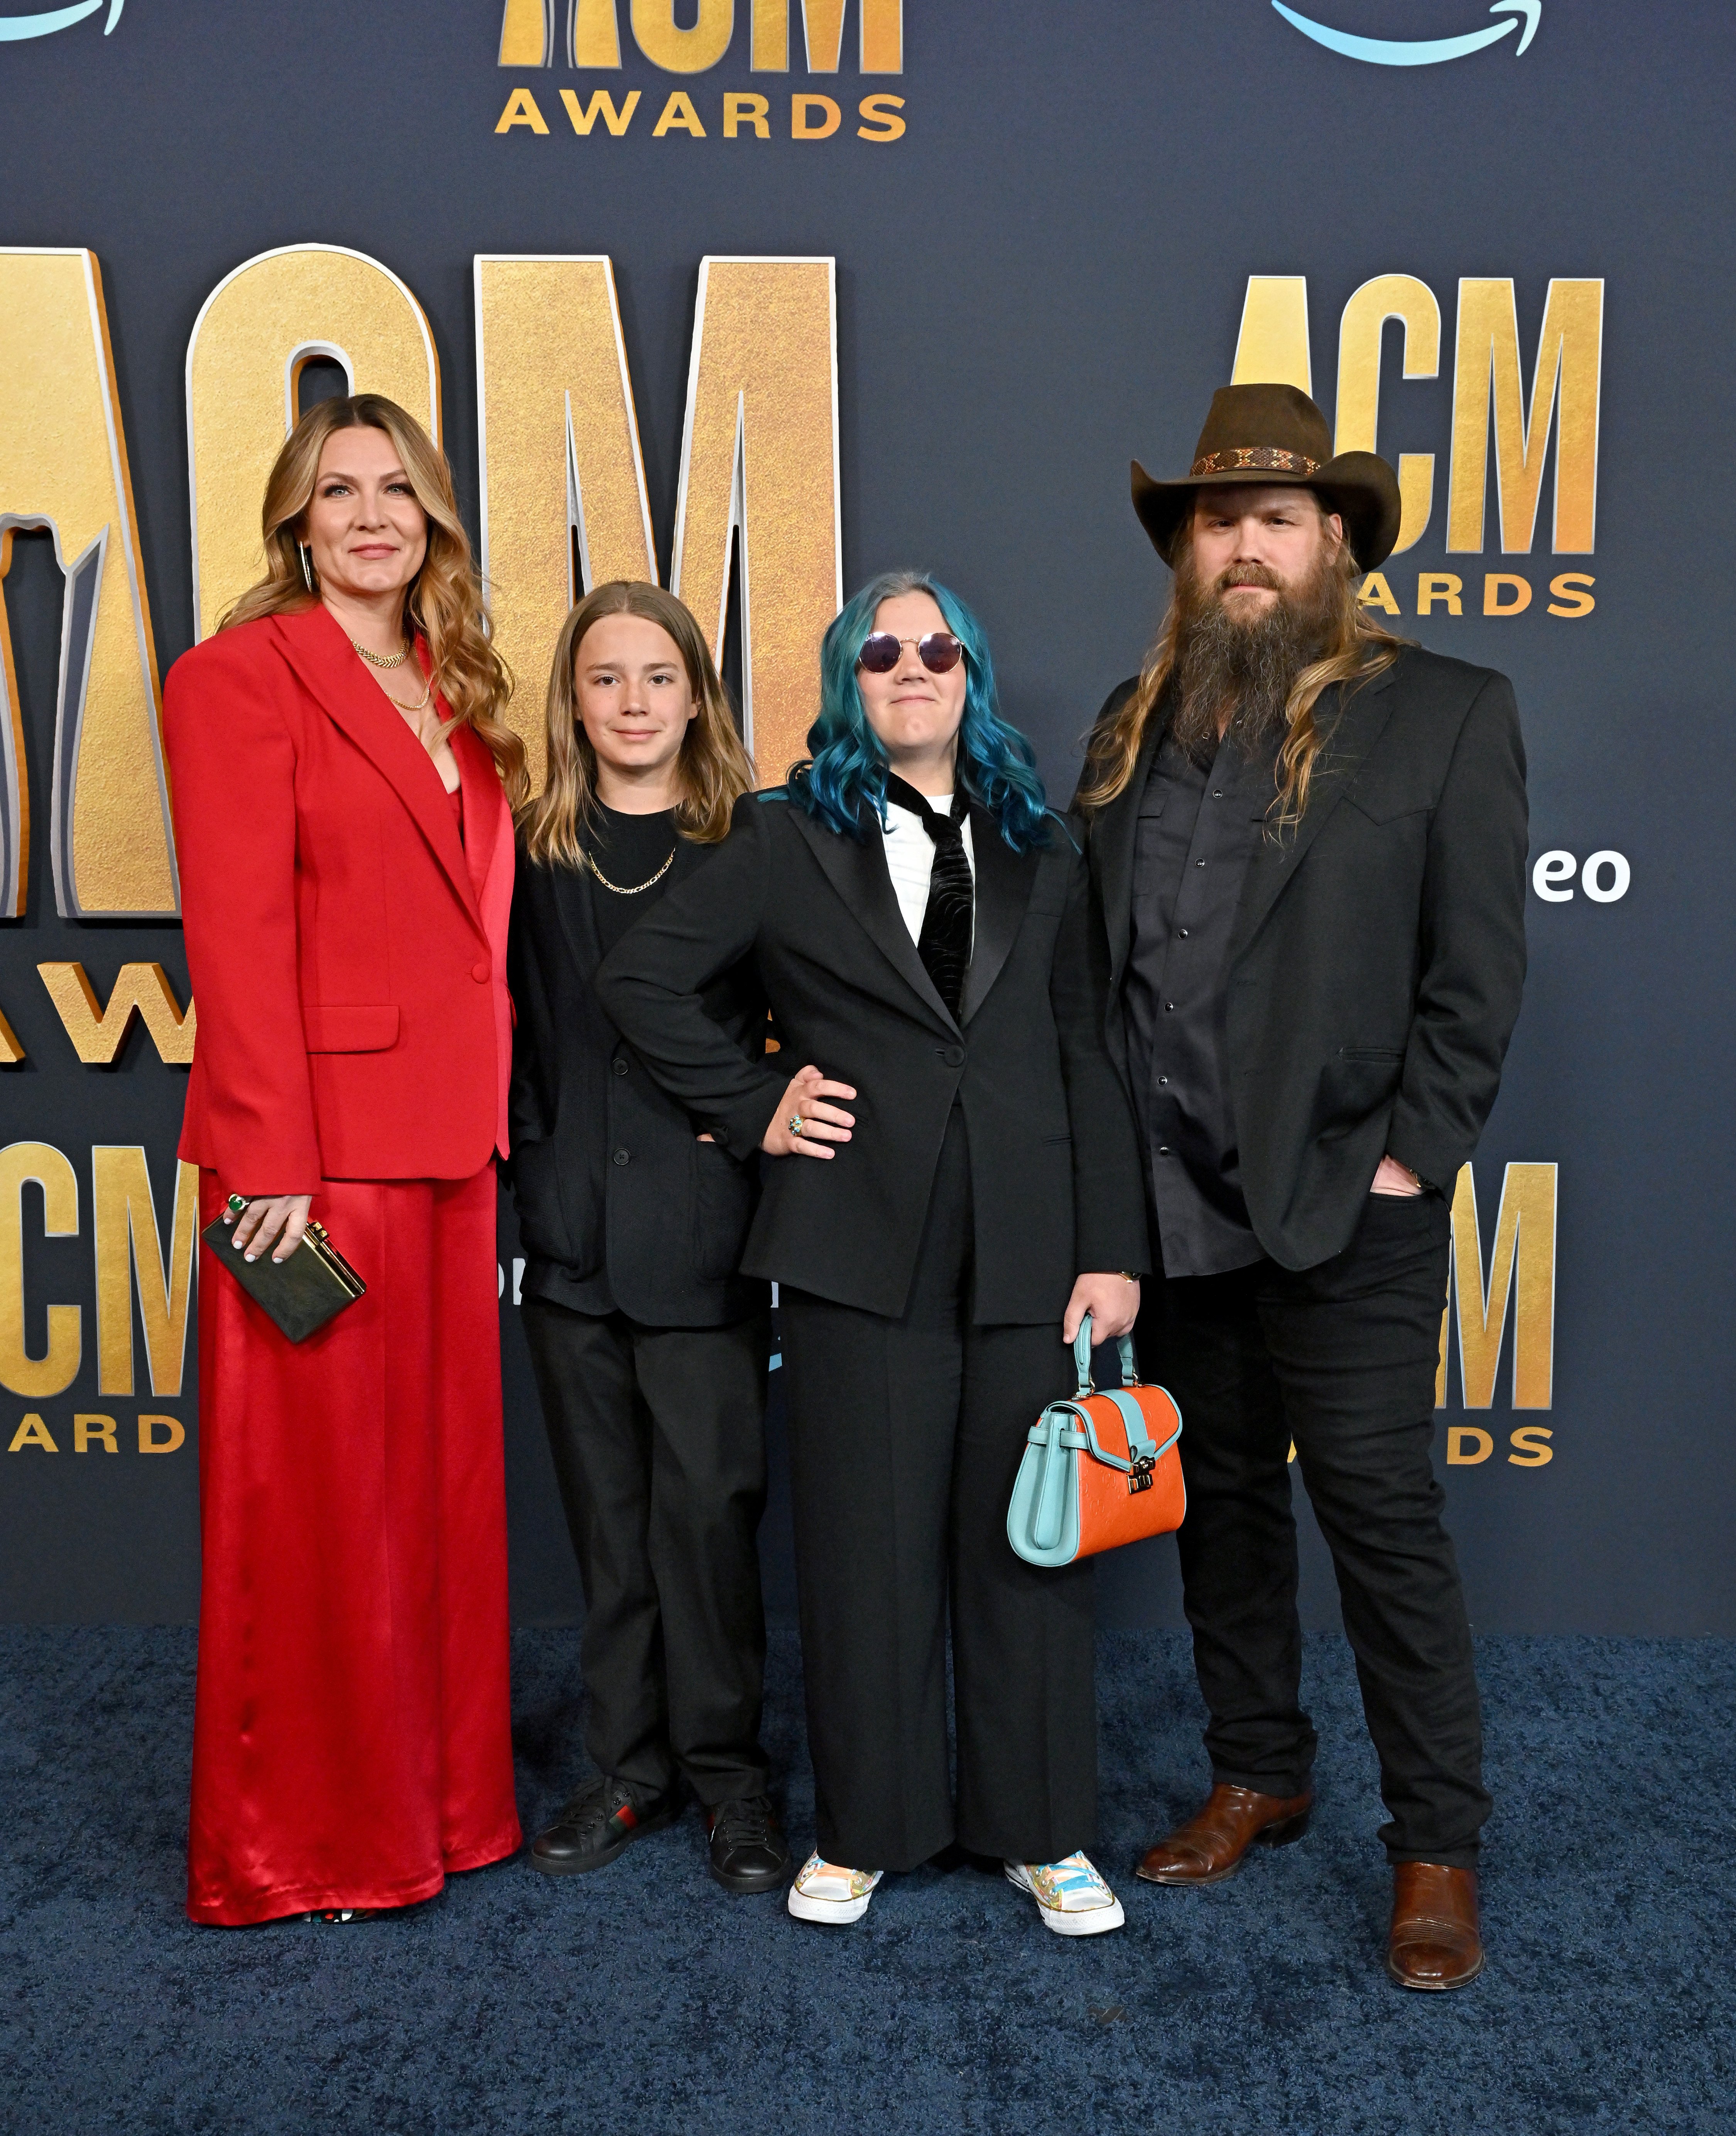 (L-R) Morgane Stapleton, Ada Stapleton, Wayland Stapleton and Chris Stapleton pose at the 57th Academy of Country Music Awards on March 7, 2022, in Las Vegas, Nevada | Source: Getty Images